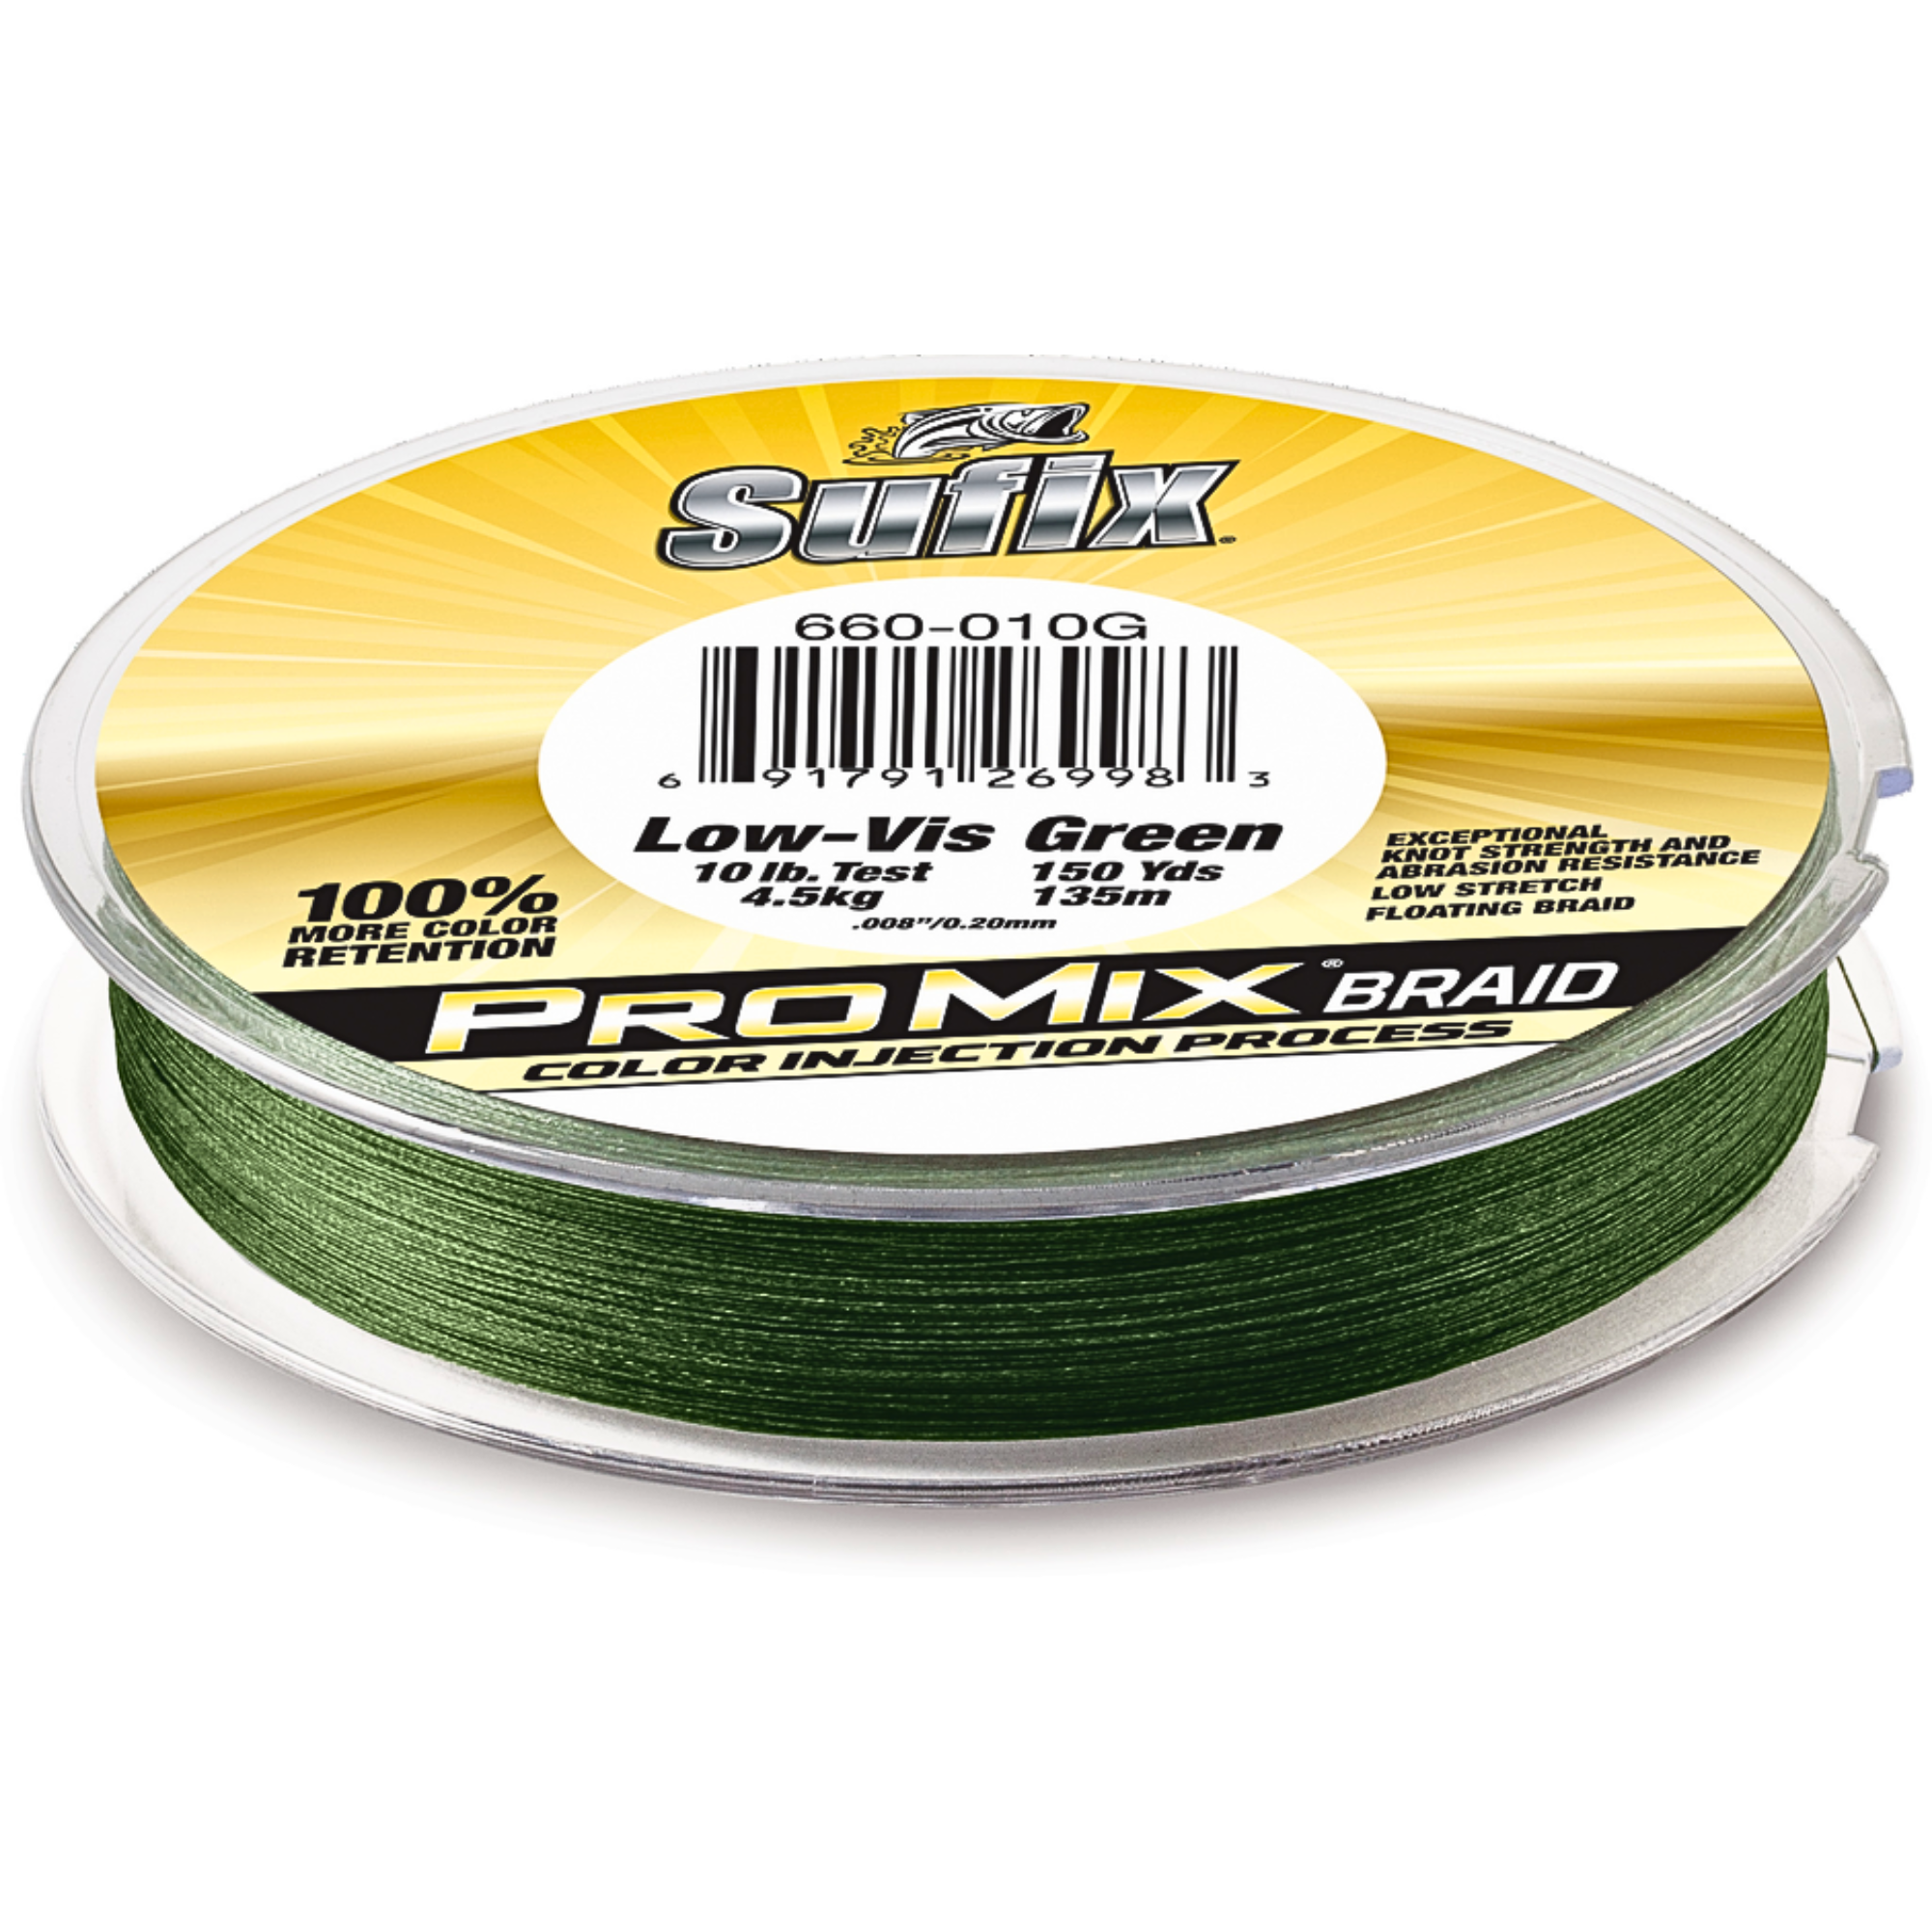 Promix Braid, Fishing Line, Color Injection Process, Fishing Store